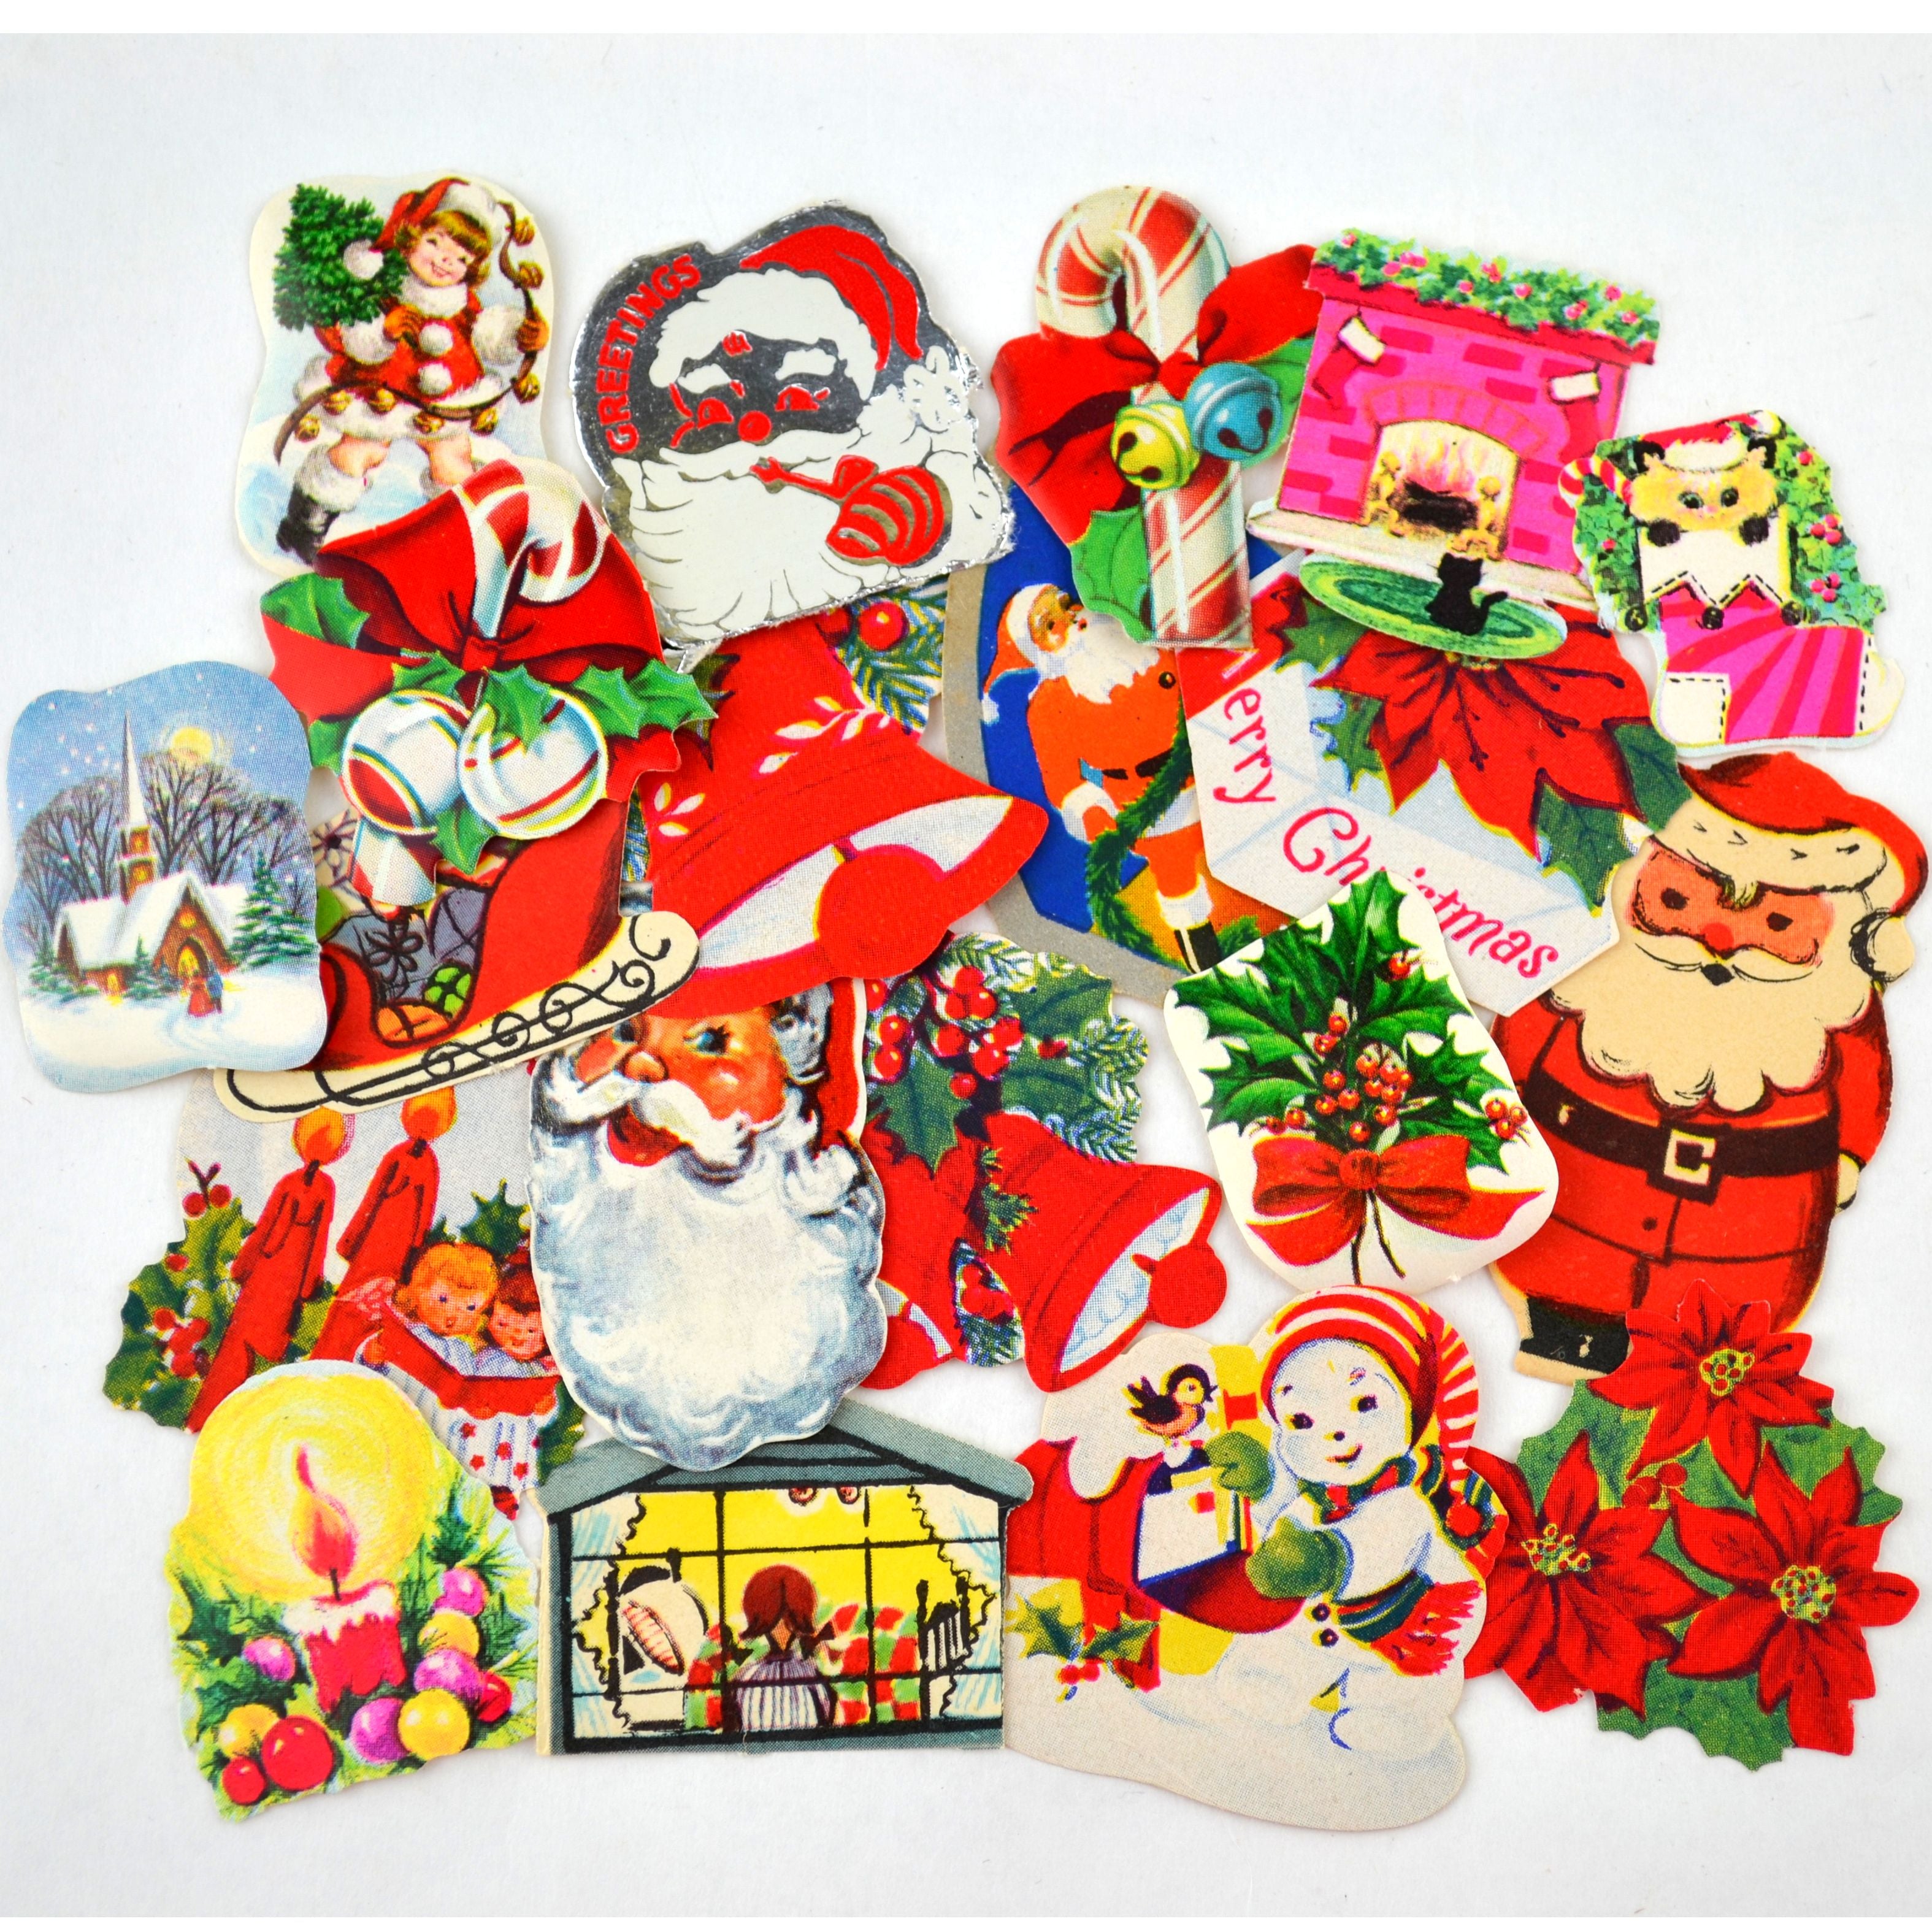 vintage christmas wrapping paper 1980's - Google Search